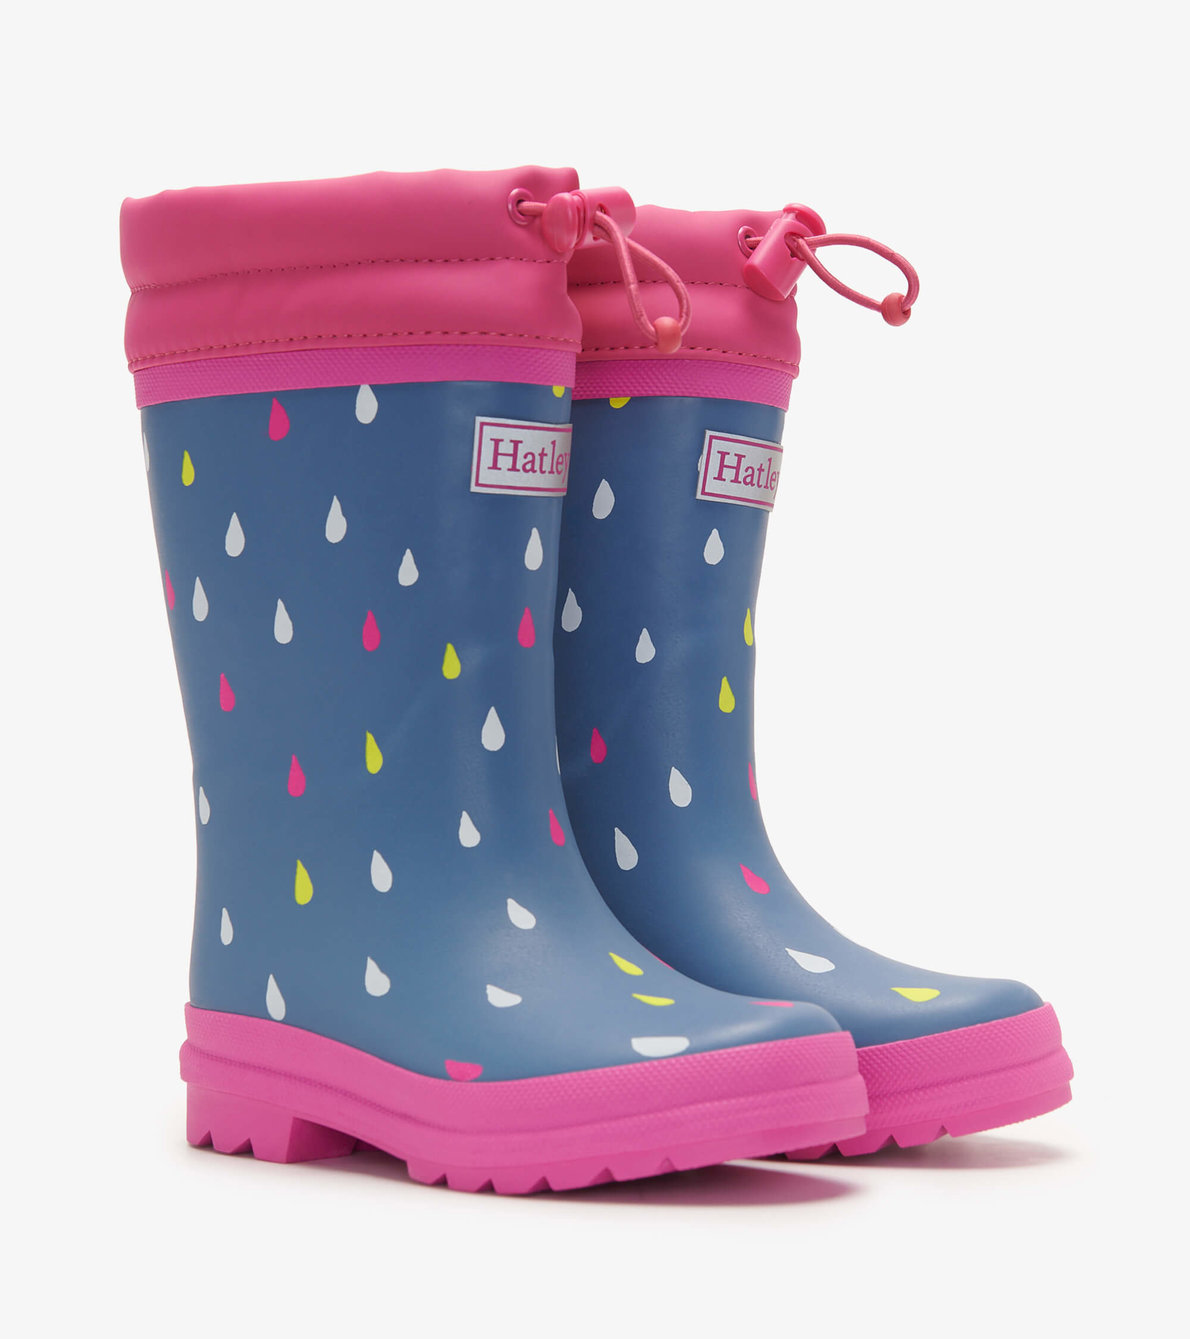 View larger image of Tiny Raindrops Sherpa Lined Kids Rain Boots